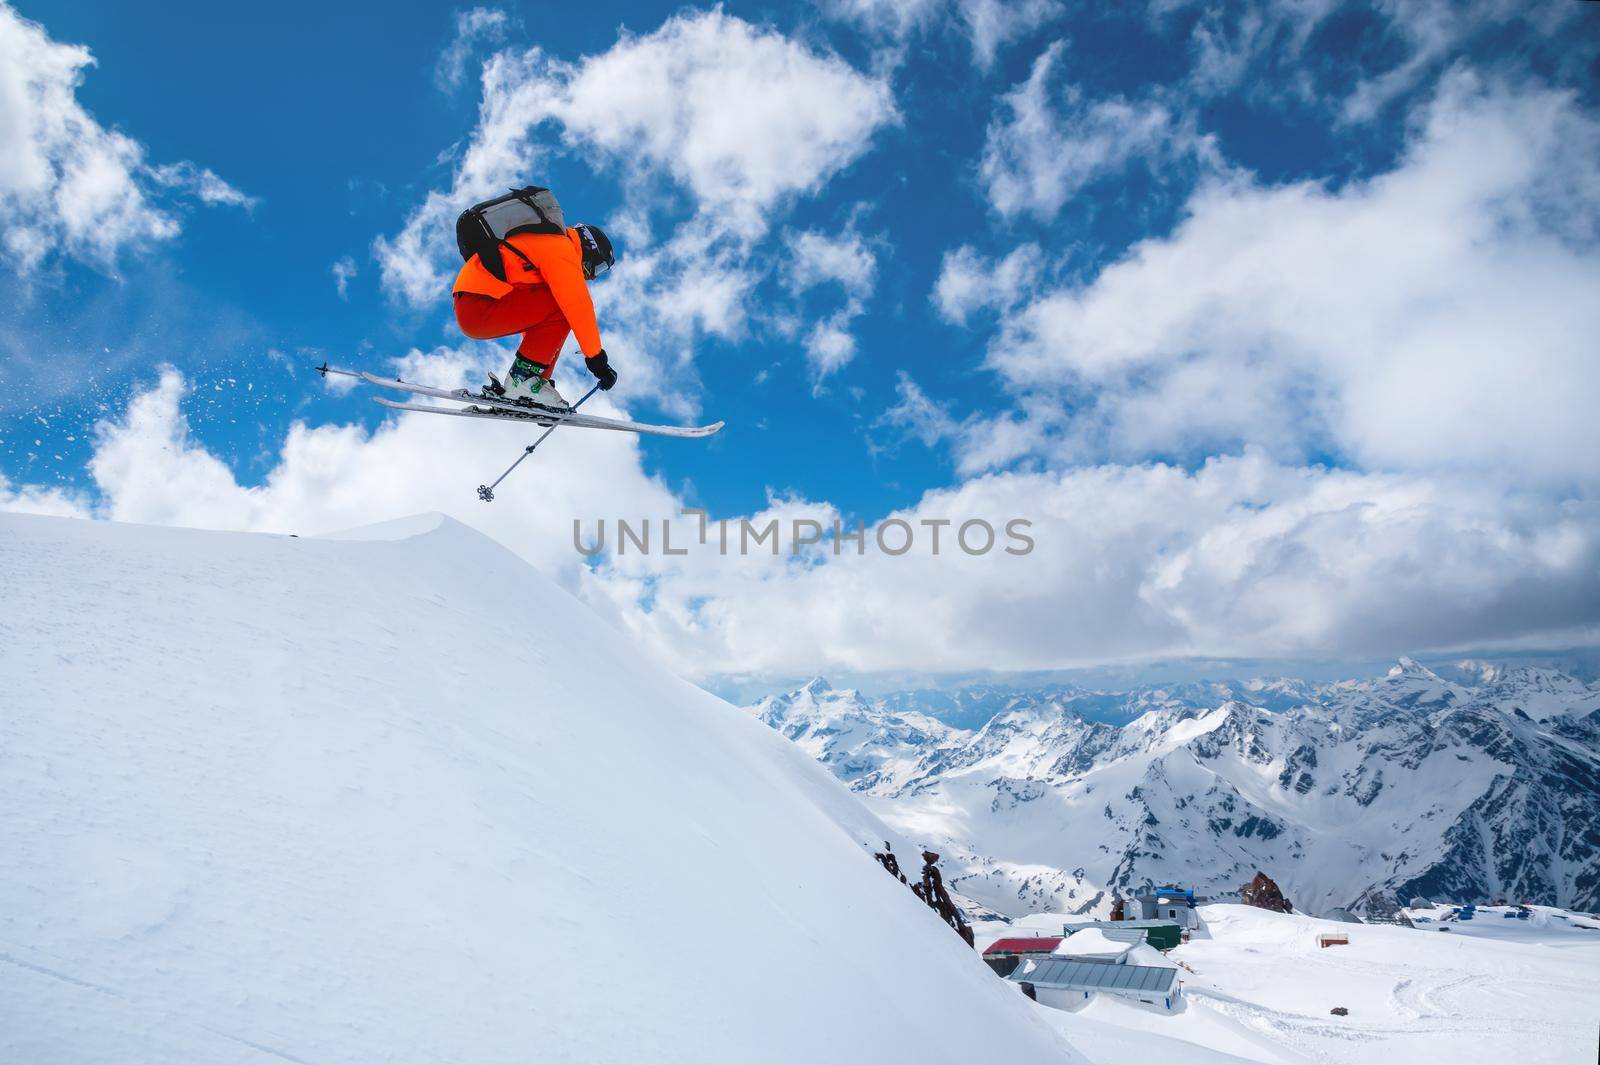 A professional skier in an orange suit jumps from a high cliff against a background of blue sky and clouds, leaving a trail of snow powder in the mountains